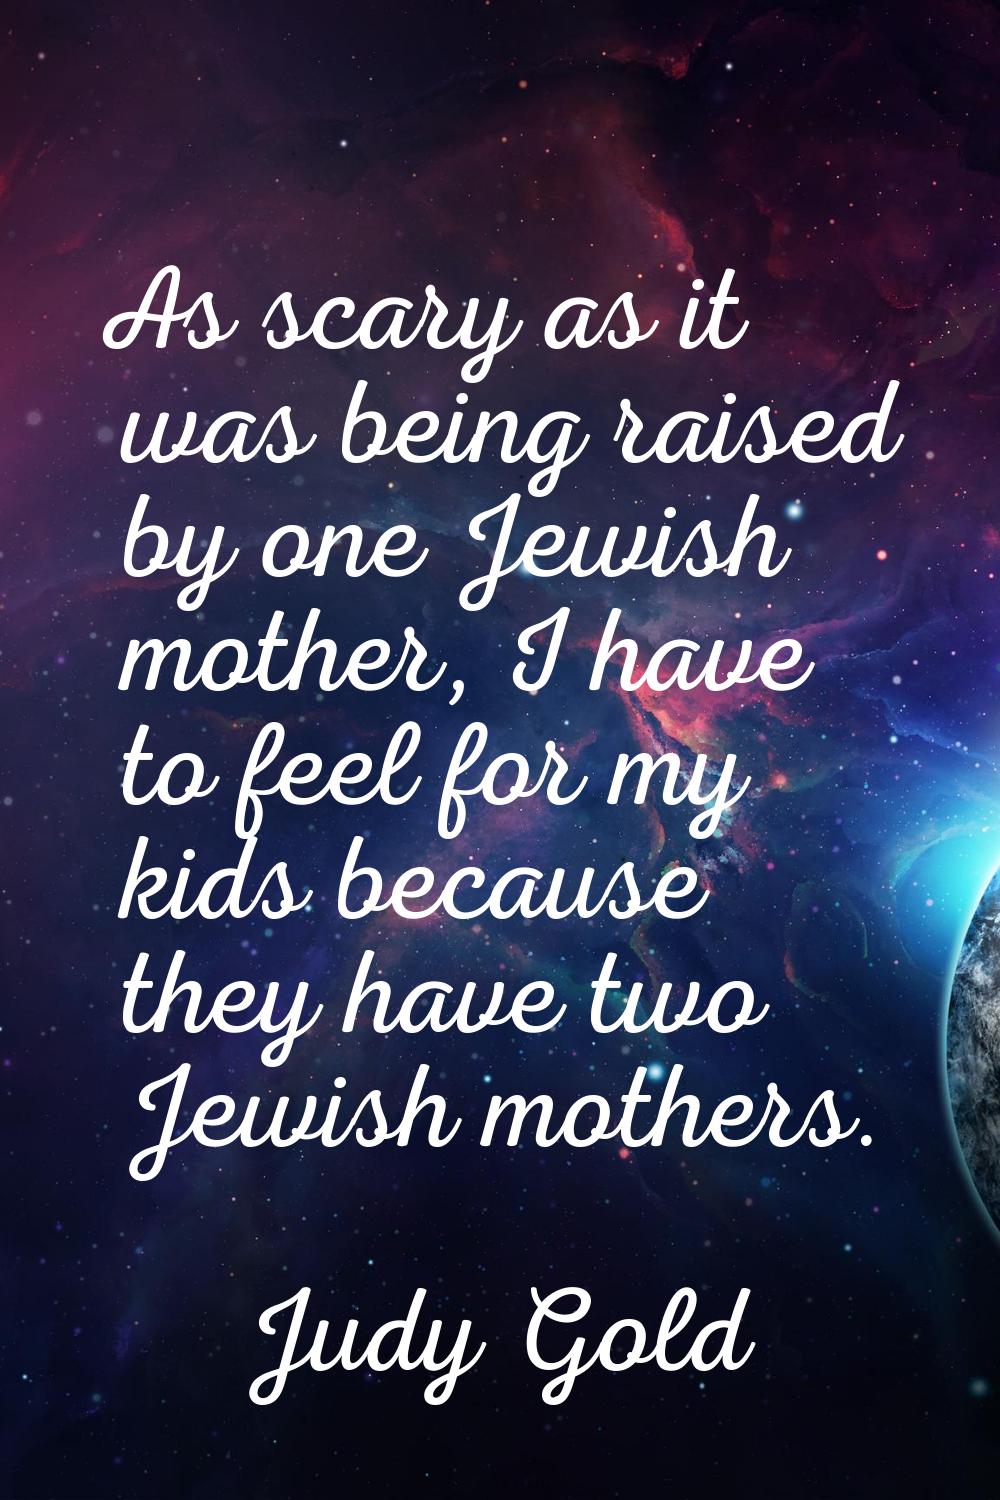 As scary as it was being raised by one Jewish mother, I have to feel for my kids because they have 